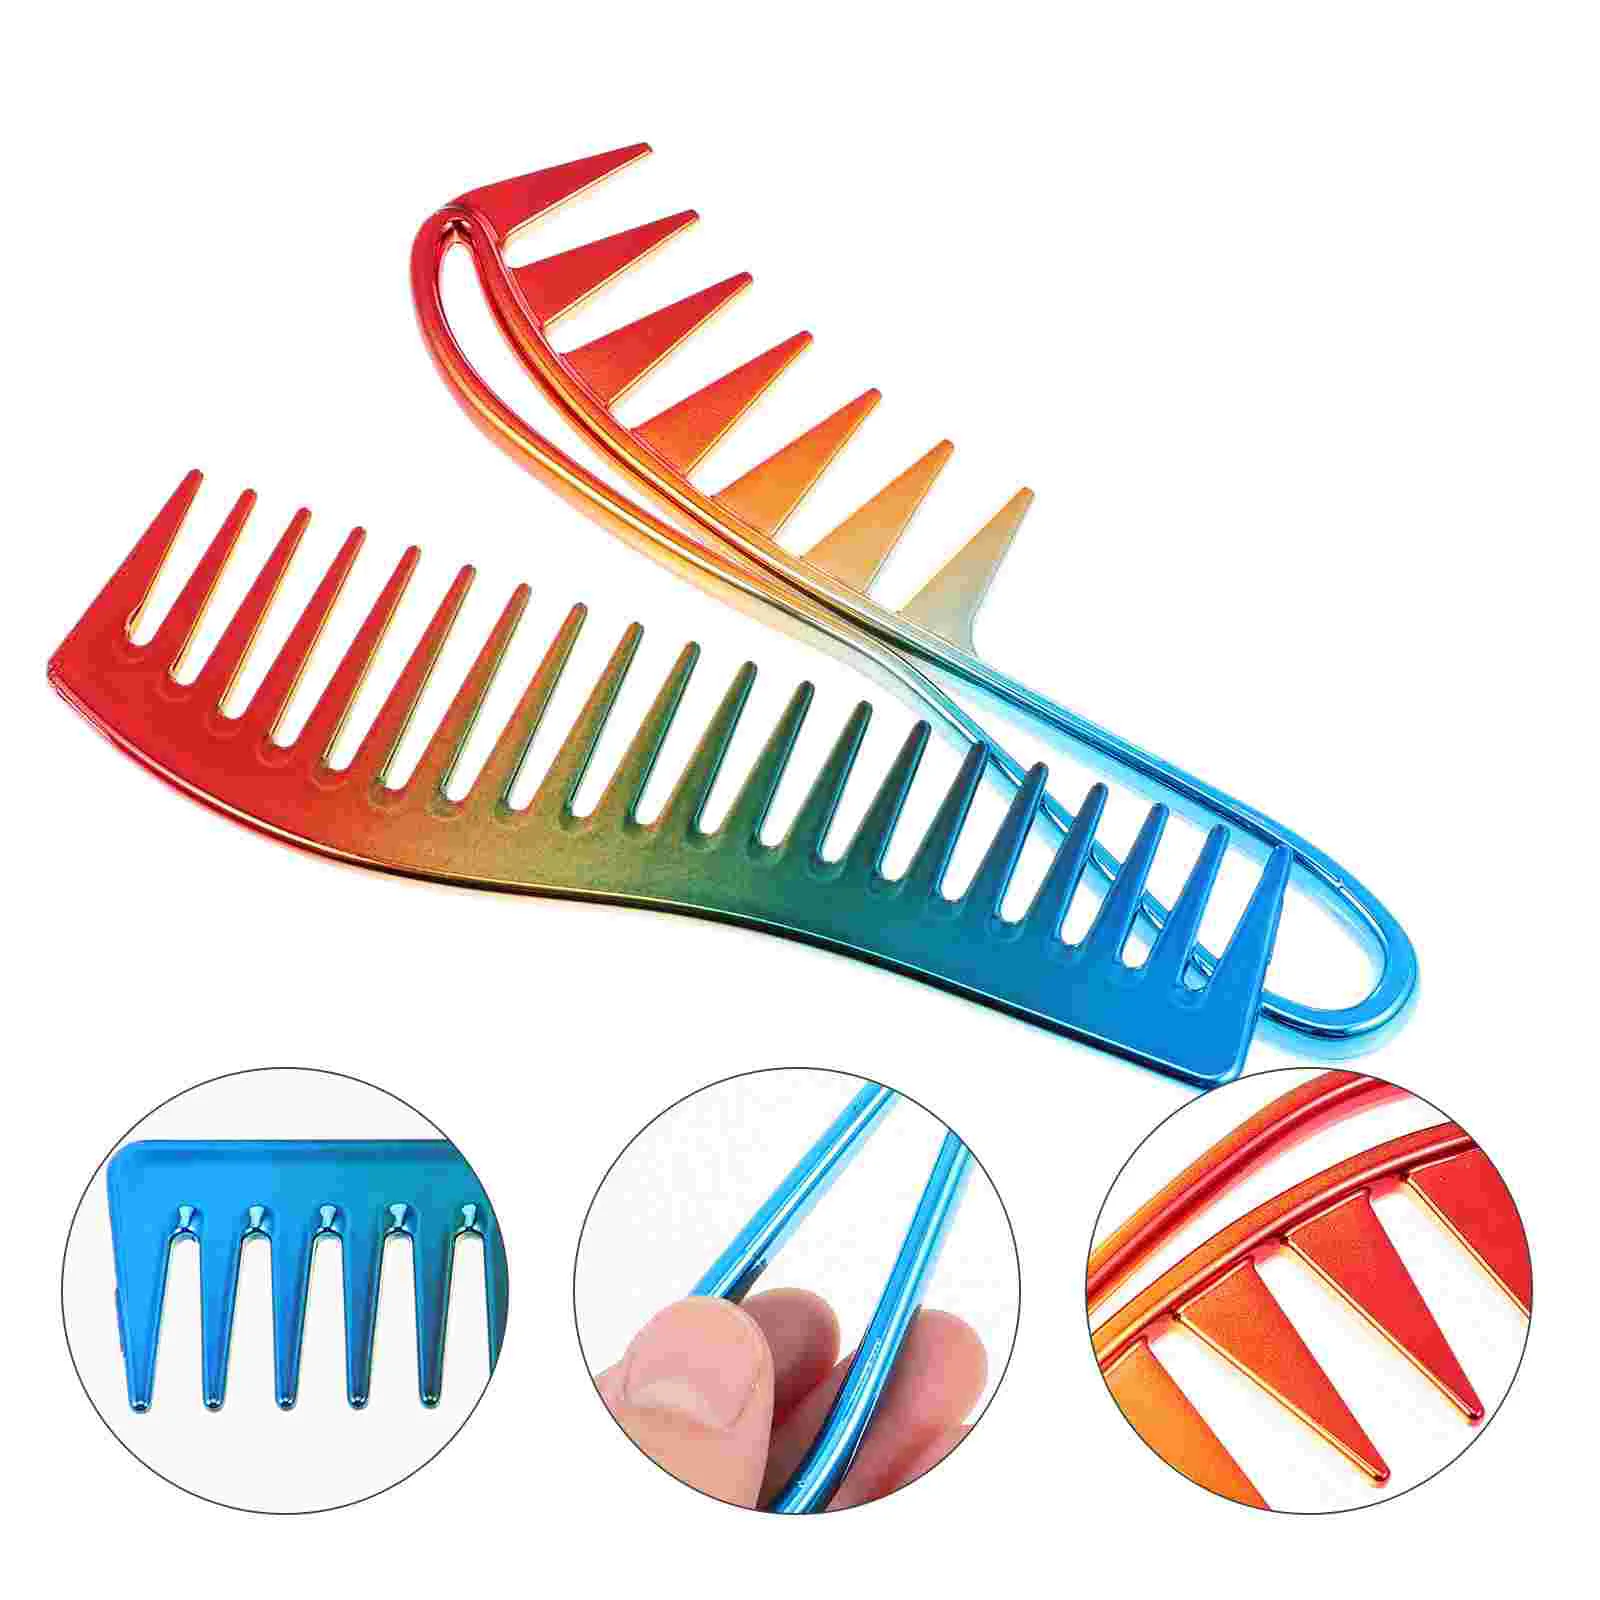 

Comb Hair Styling Brush Combs Tooth Barber Wide Men Hairdressing Detangling Detangler Salon Static Anti Hairstylist Head